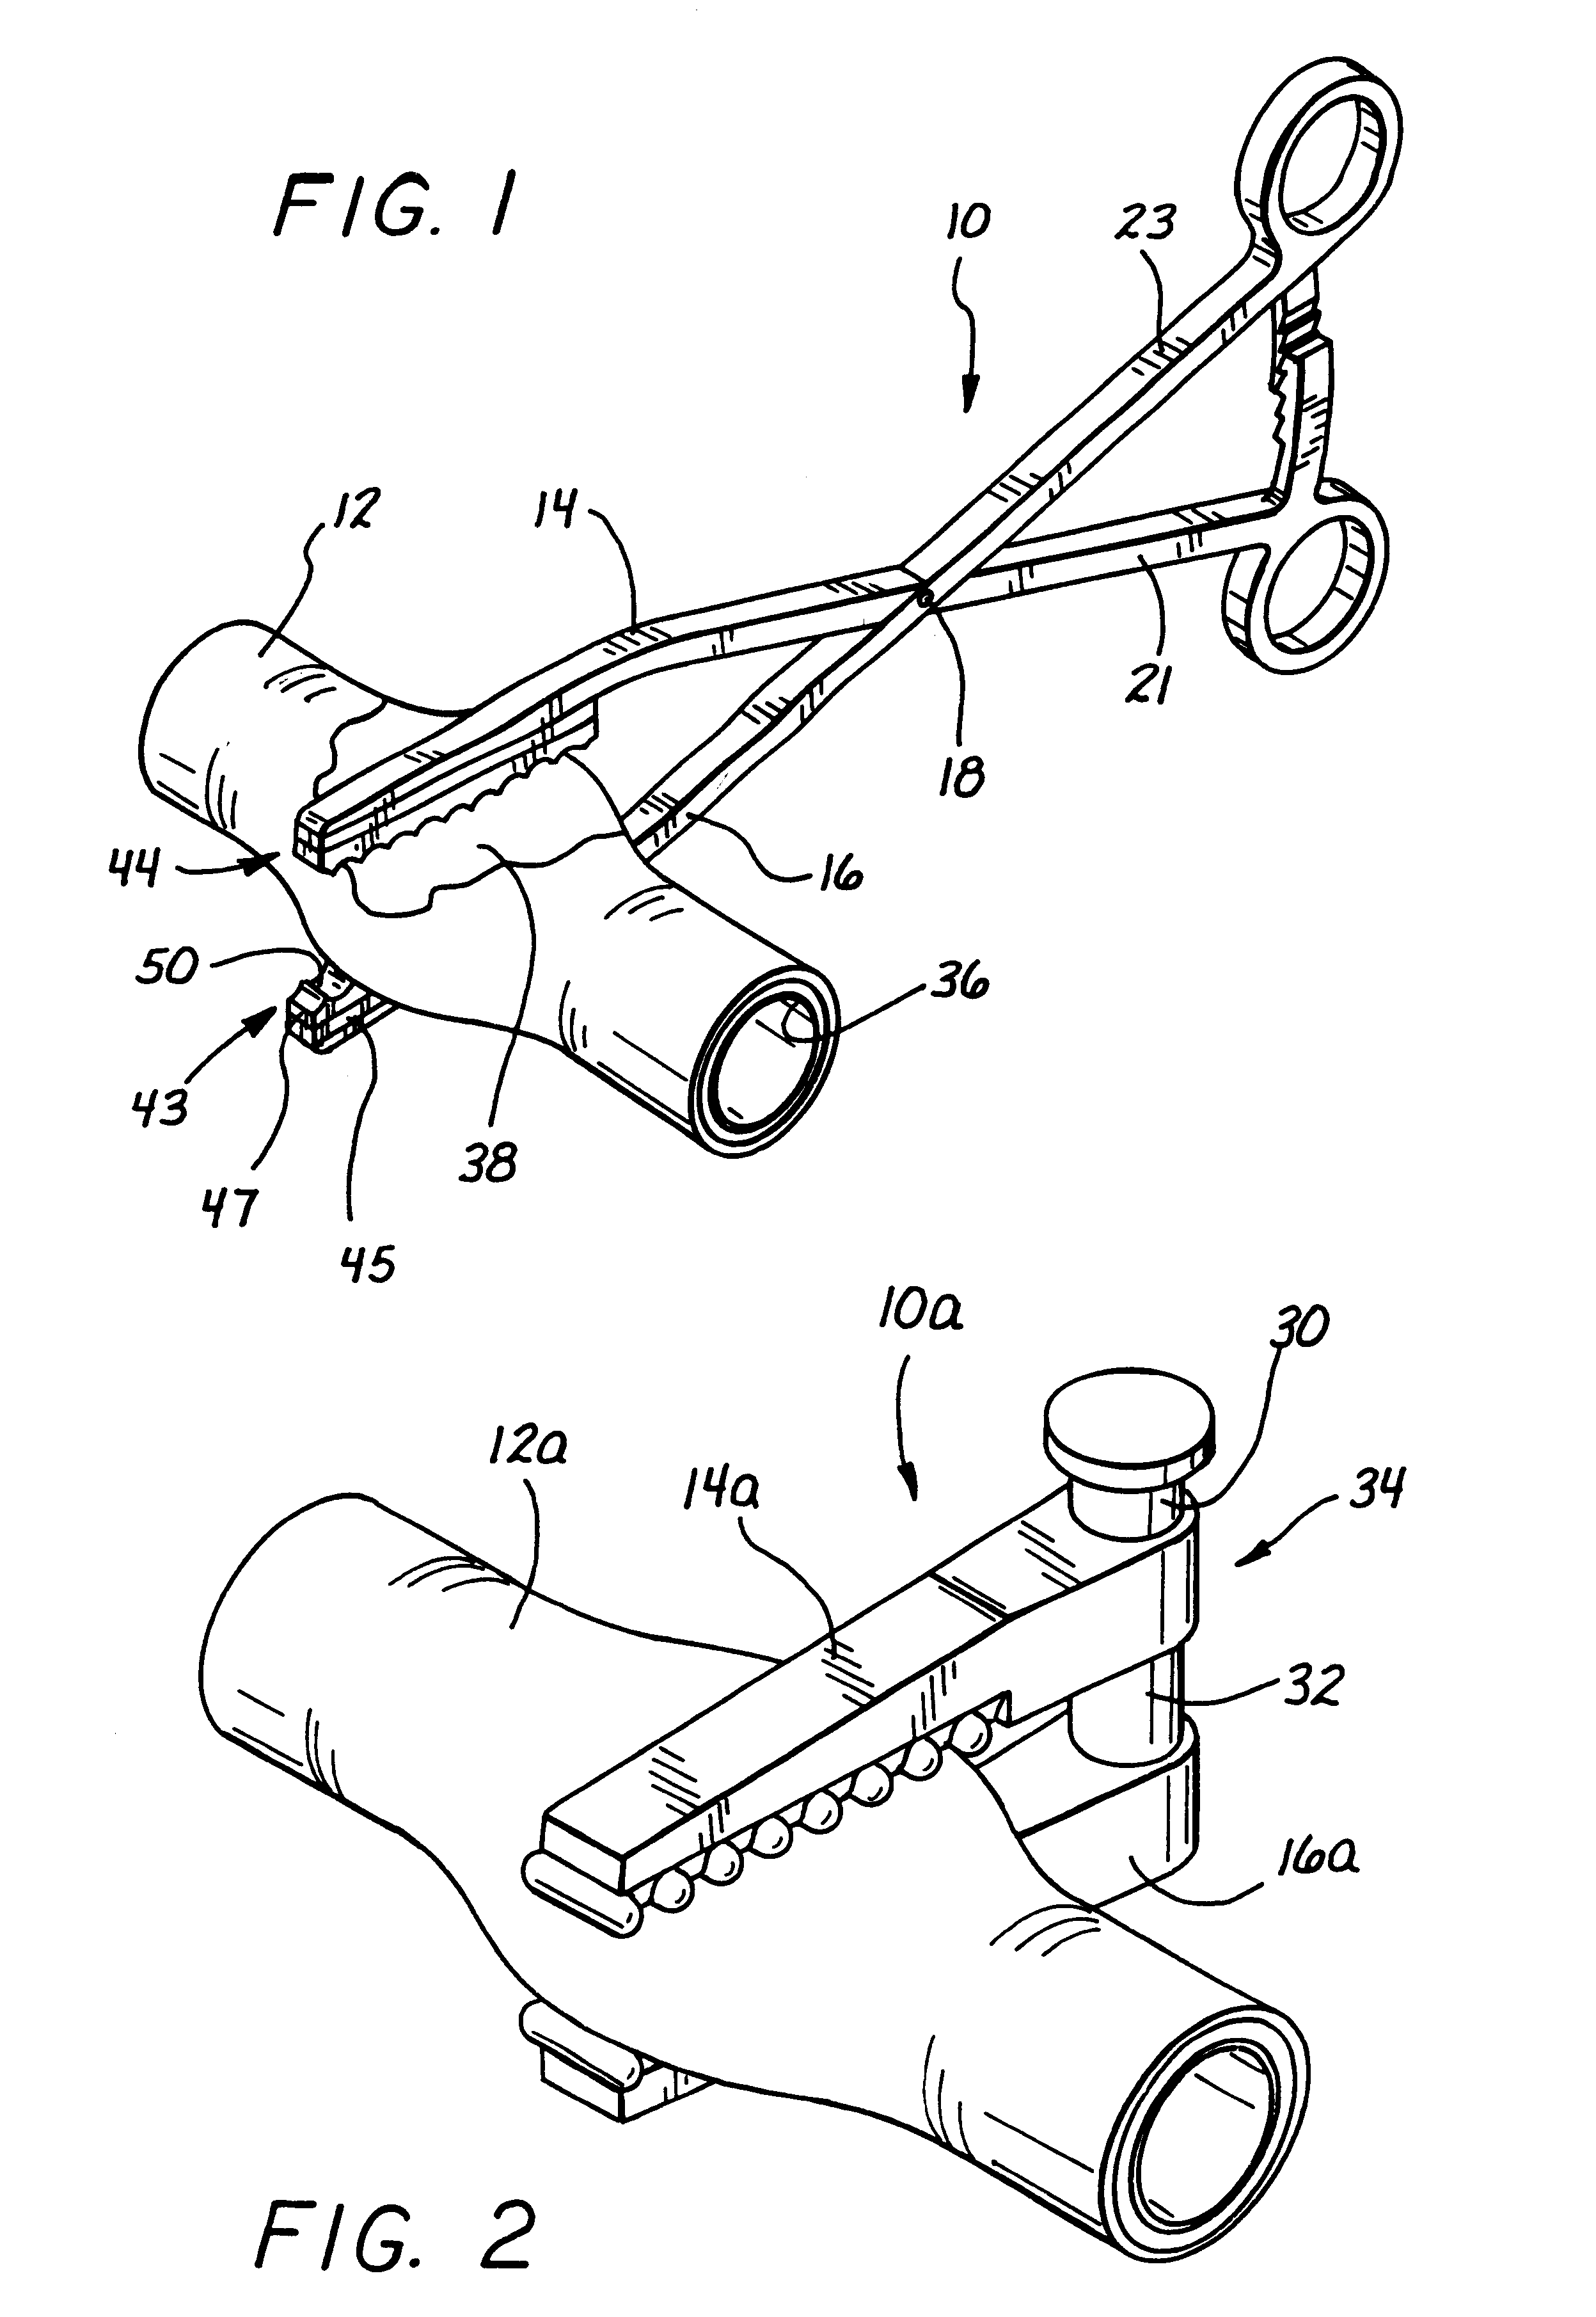 Surgical clamp with improved traction